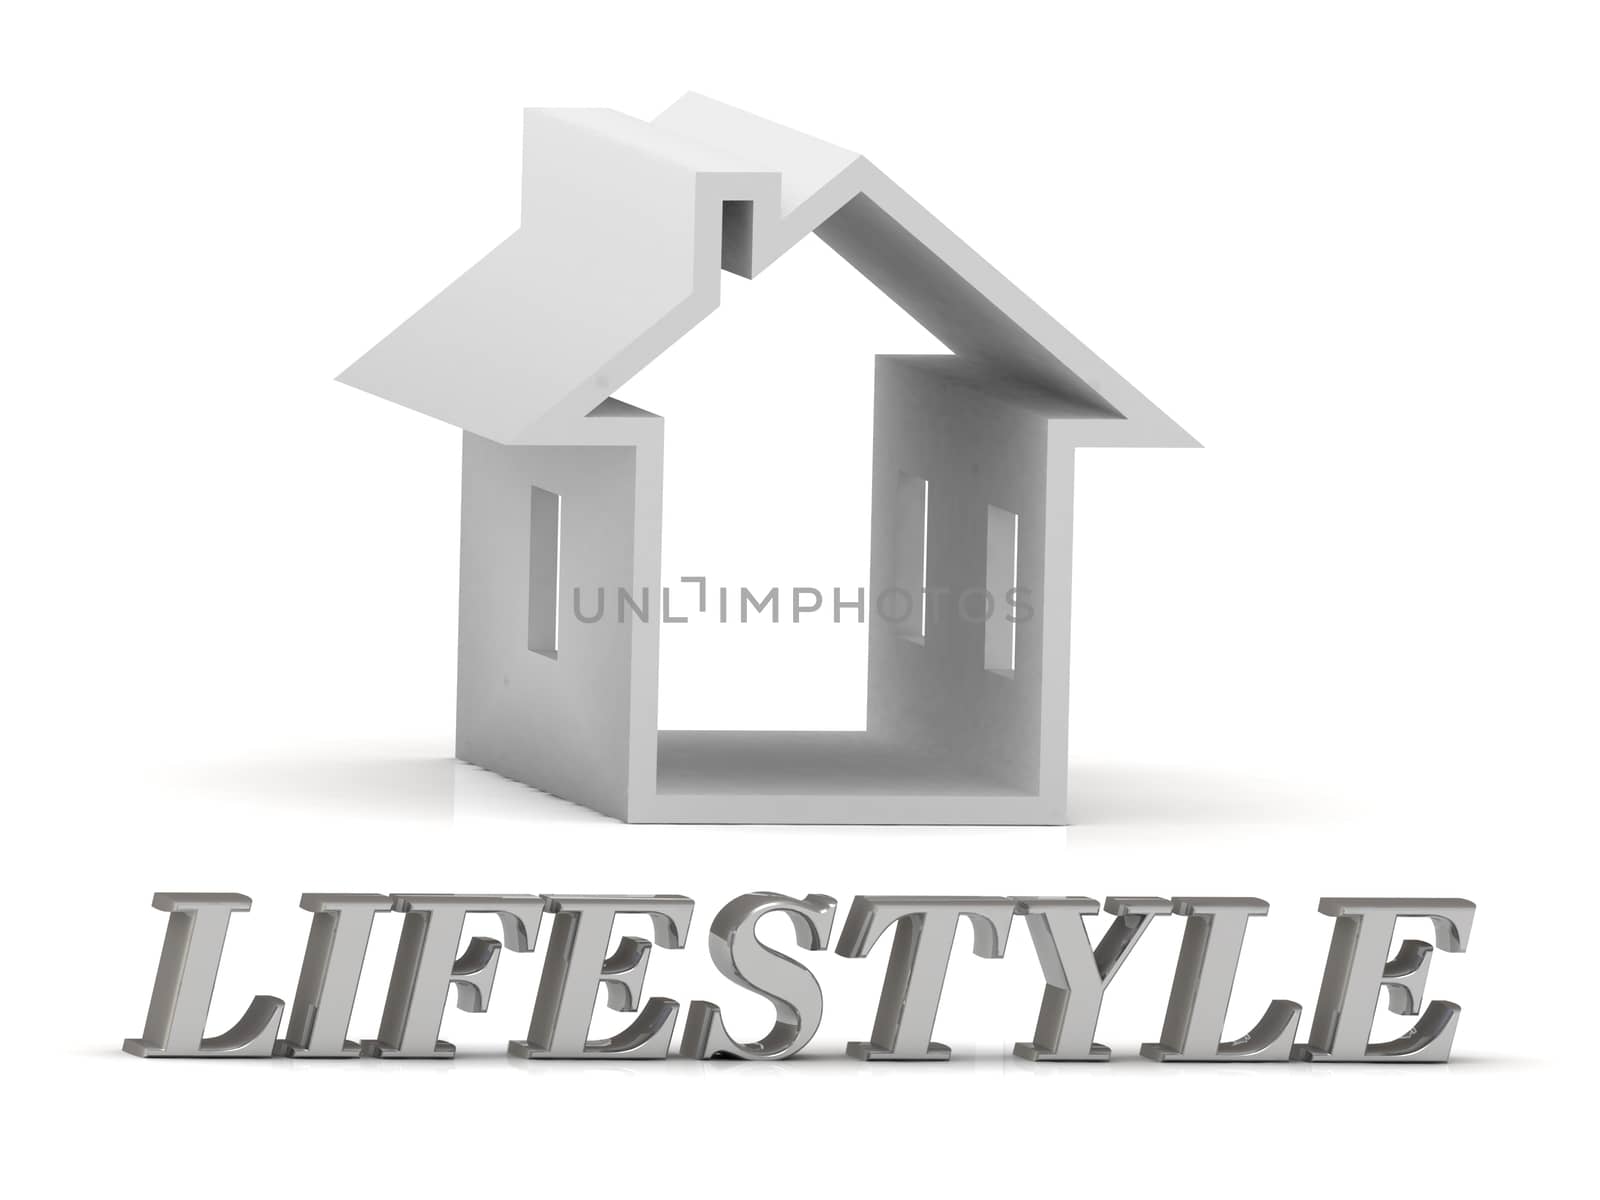 LIFESTYLE- inscription of silver letters and white house on white background